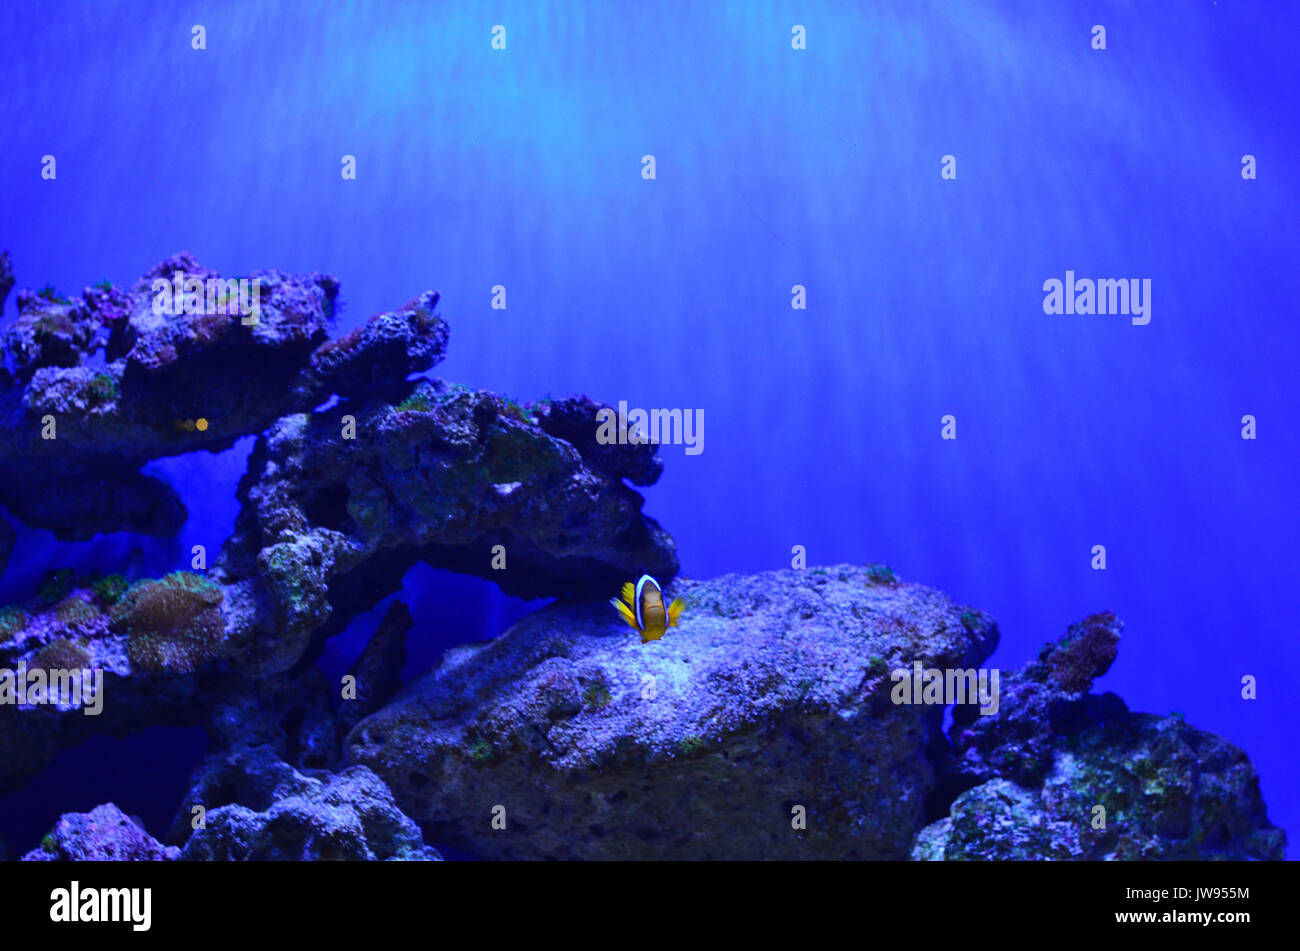 A clown fish floats right into the chamber near the stones at a depth. Blue background, horizontal photo Stock Photo